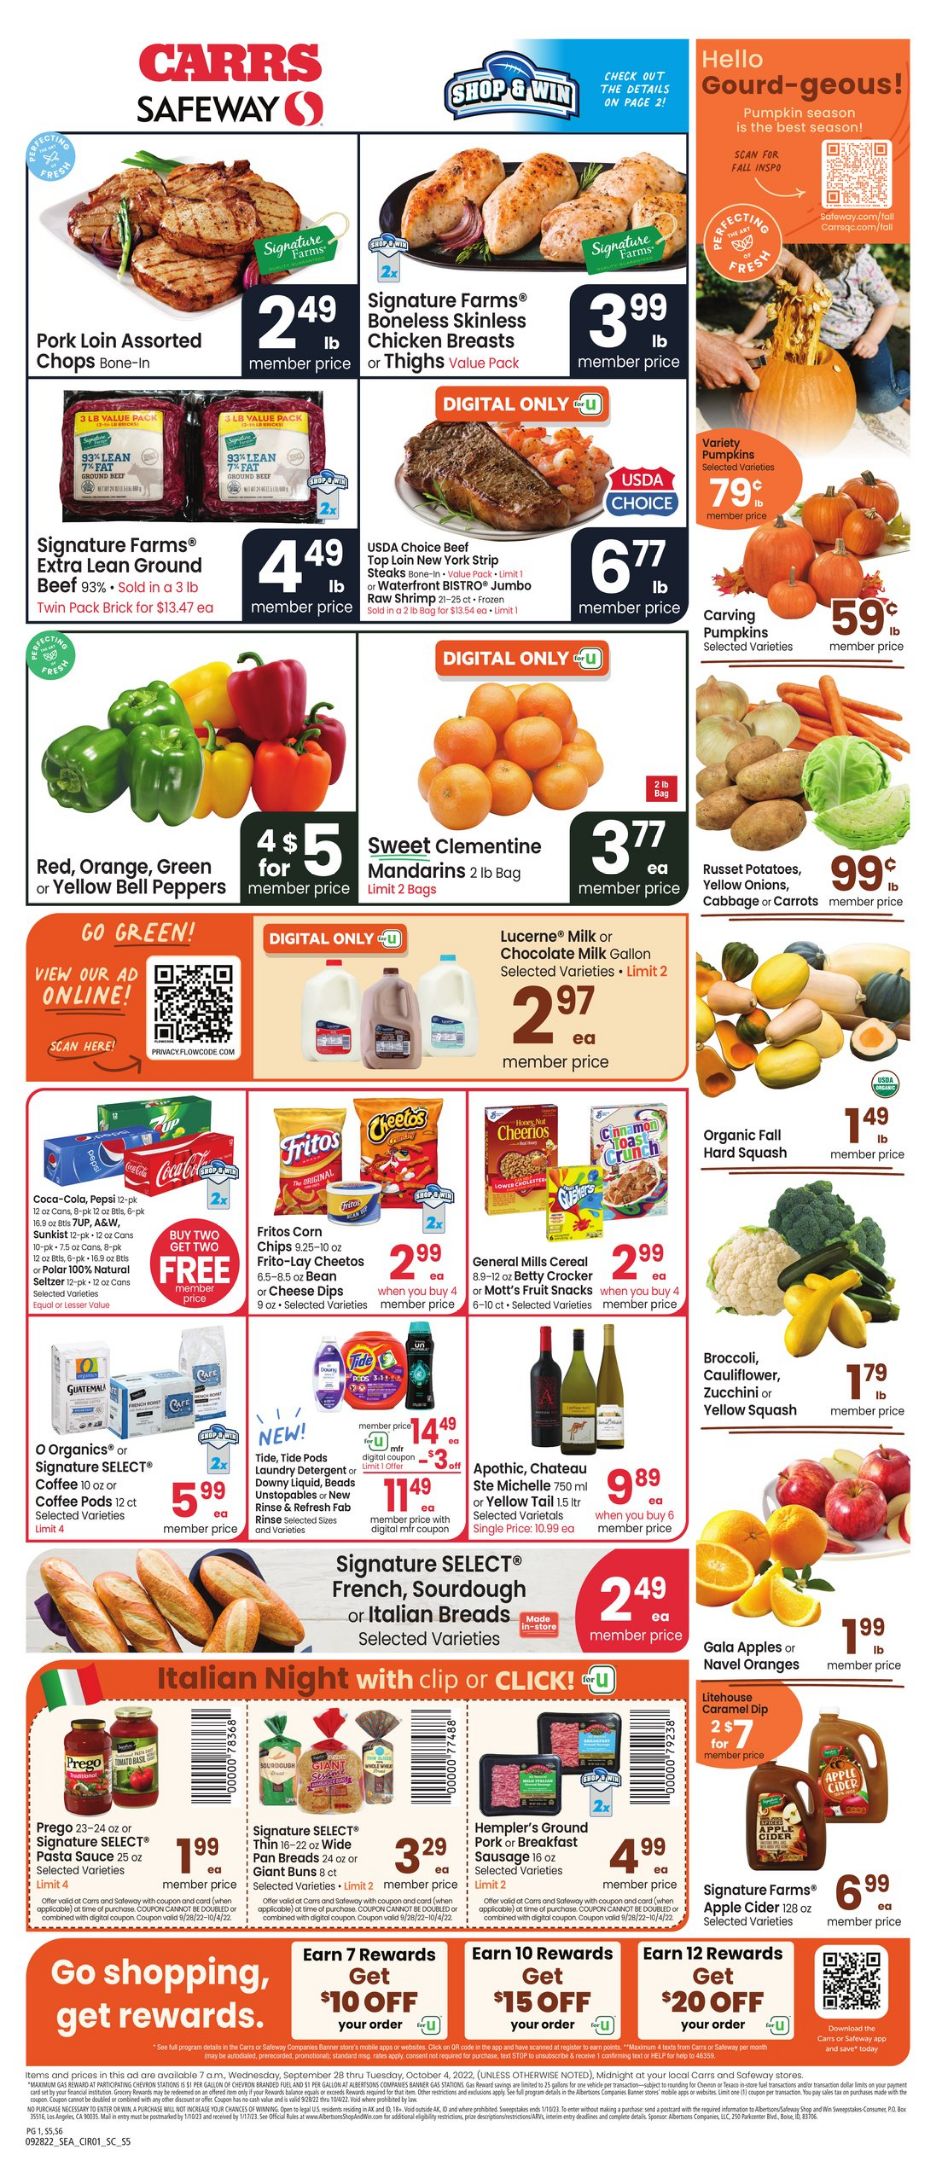 Carrs Promotional weekly ads